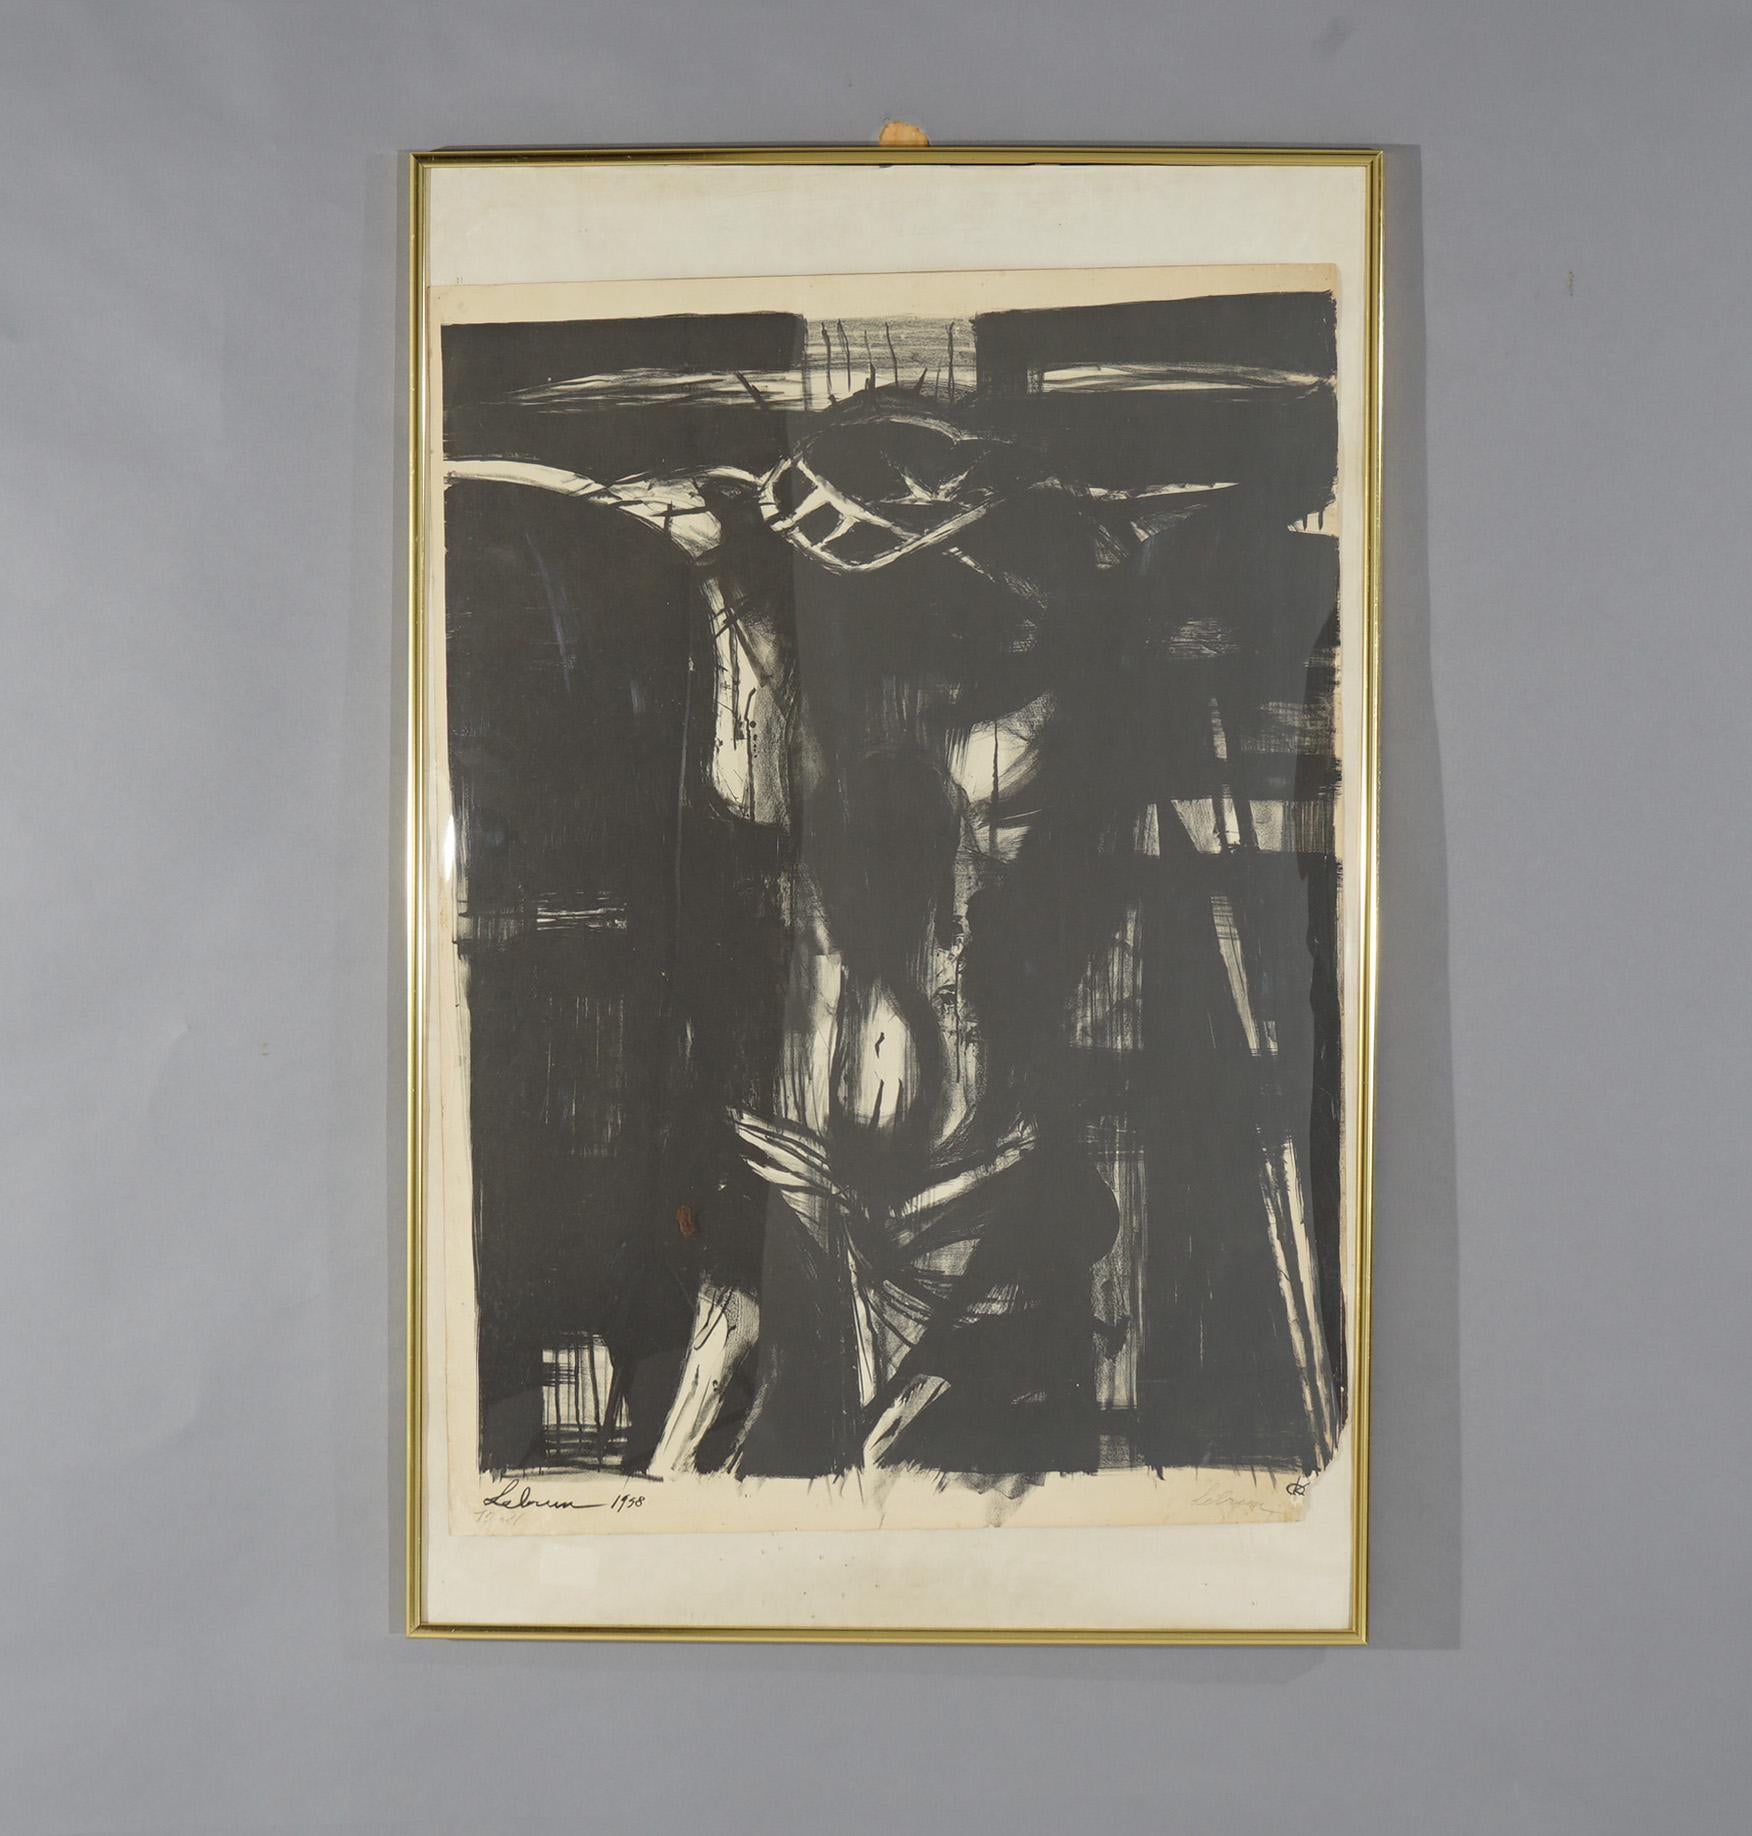 Mid Century Modern Abstract Lithograph of The Crucifixion of Jesus Christ, Pencil Signed by Lebrun, Framed, C1958

Measures - 37